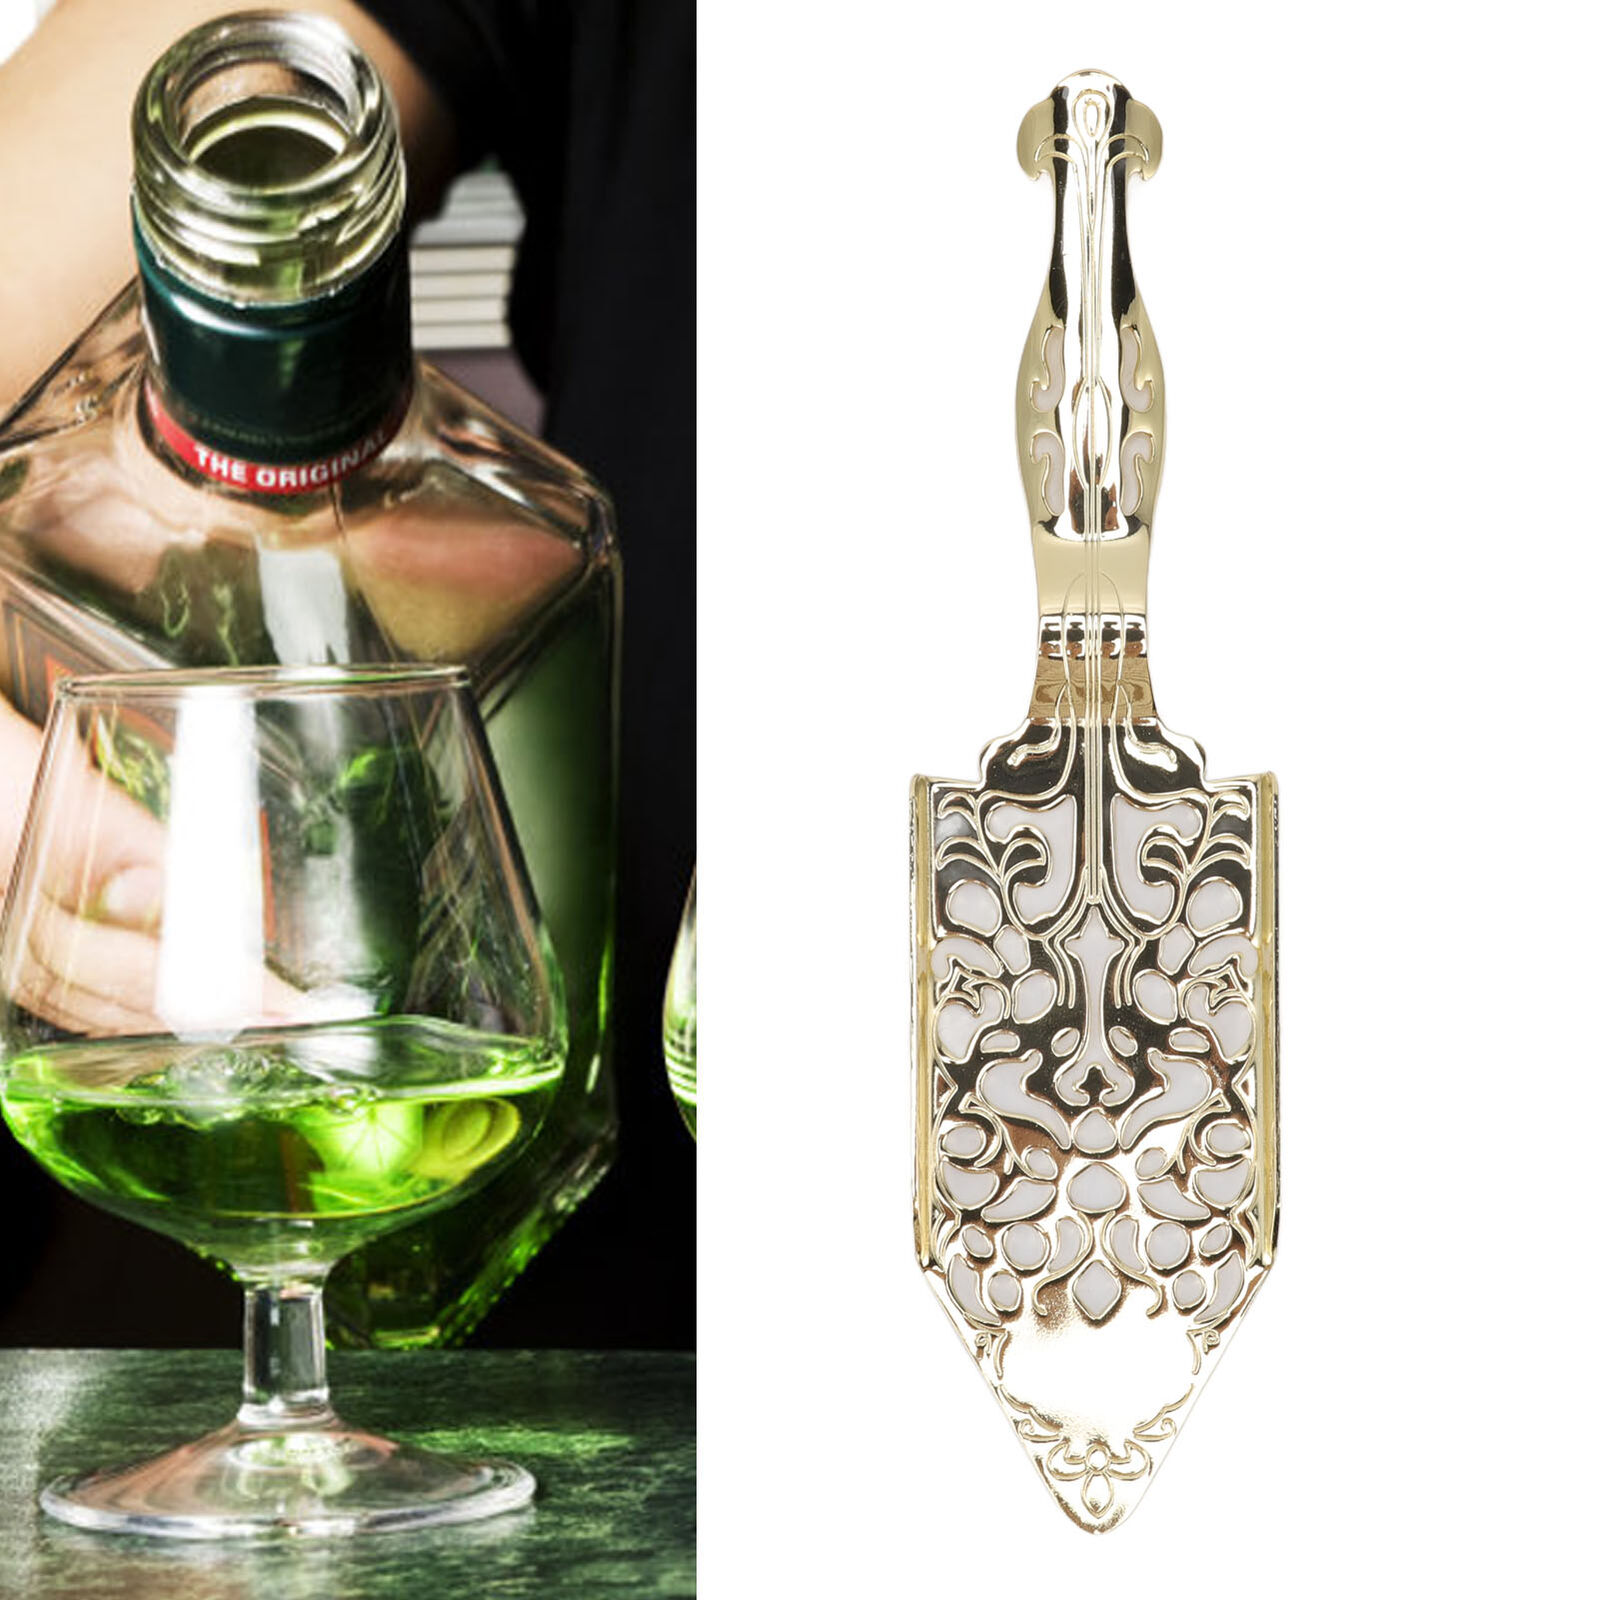 GO (Gold)Absinthe Spoon Vintage Hollow Design Stainless Steel Wormwood FO Unbranded Does not Apply